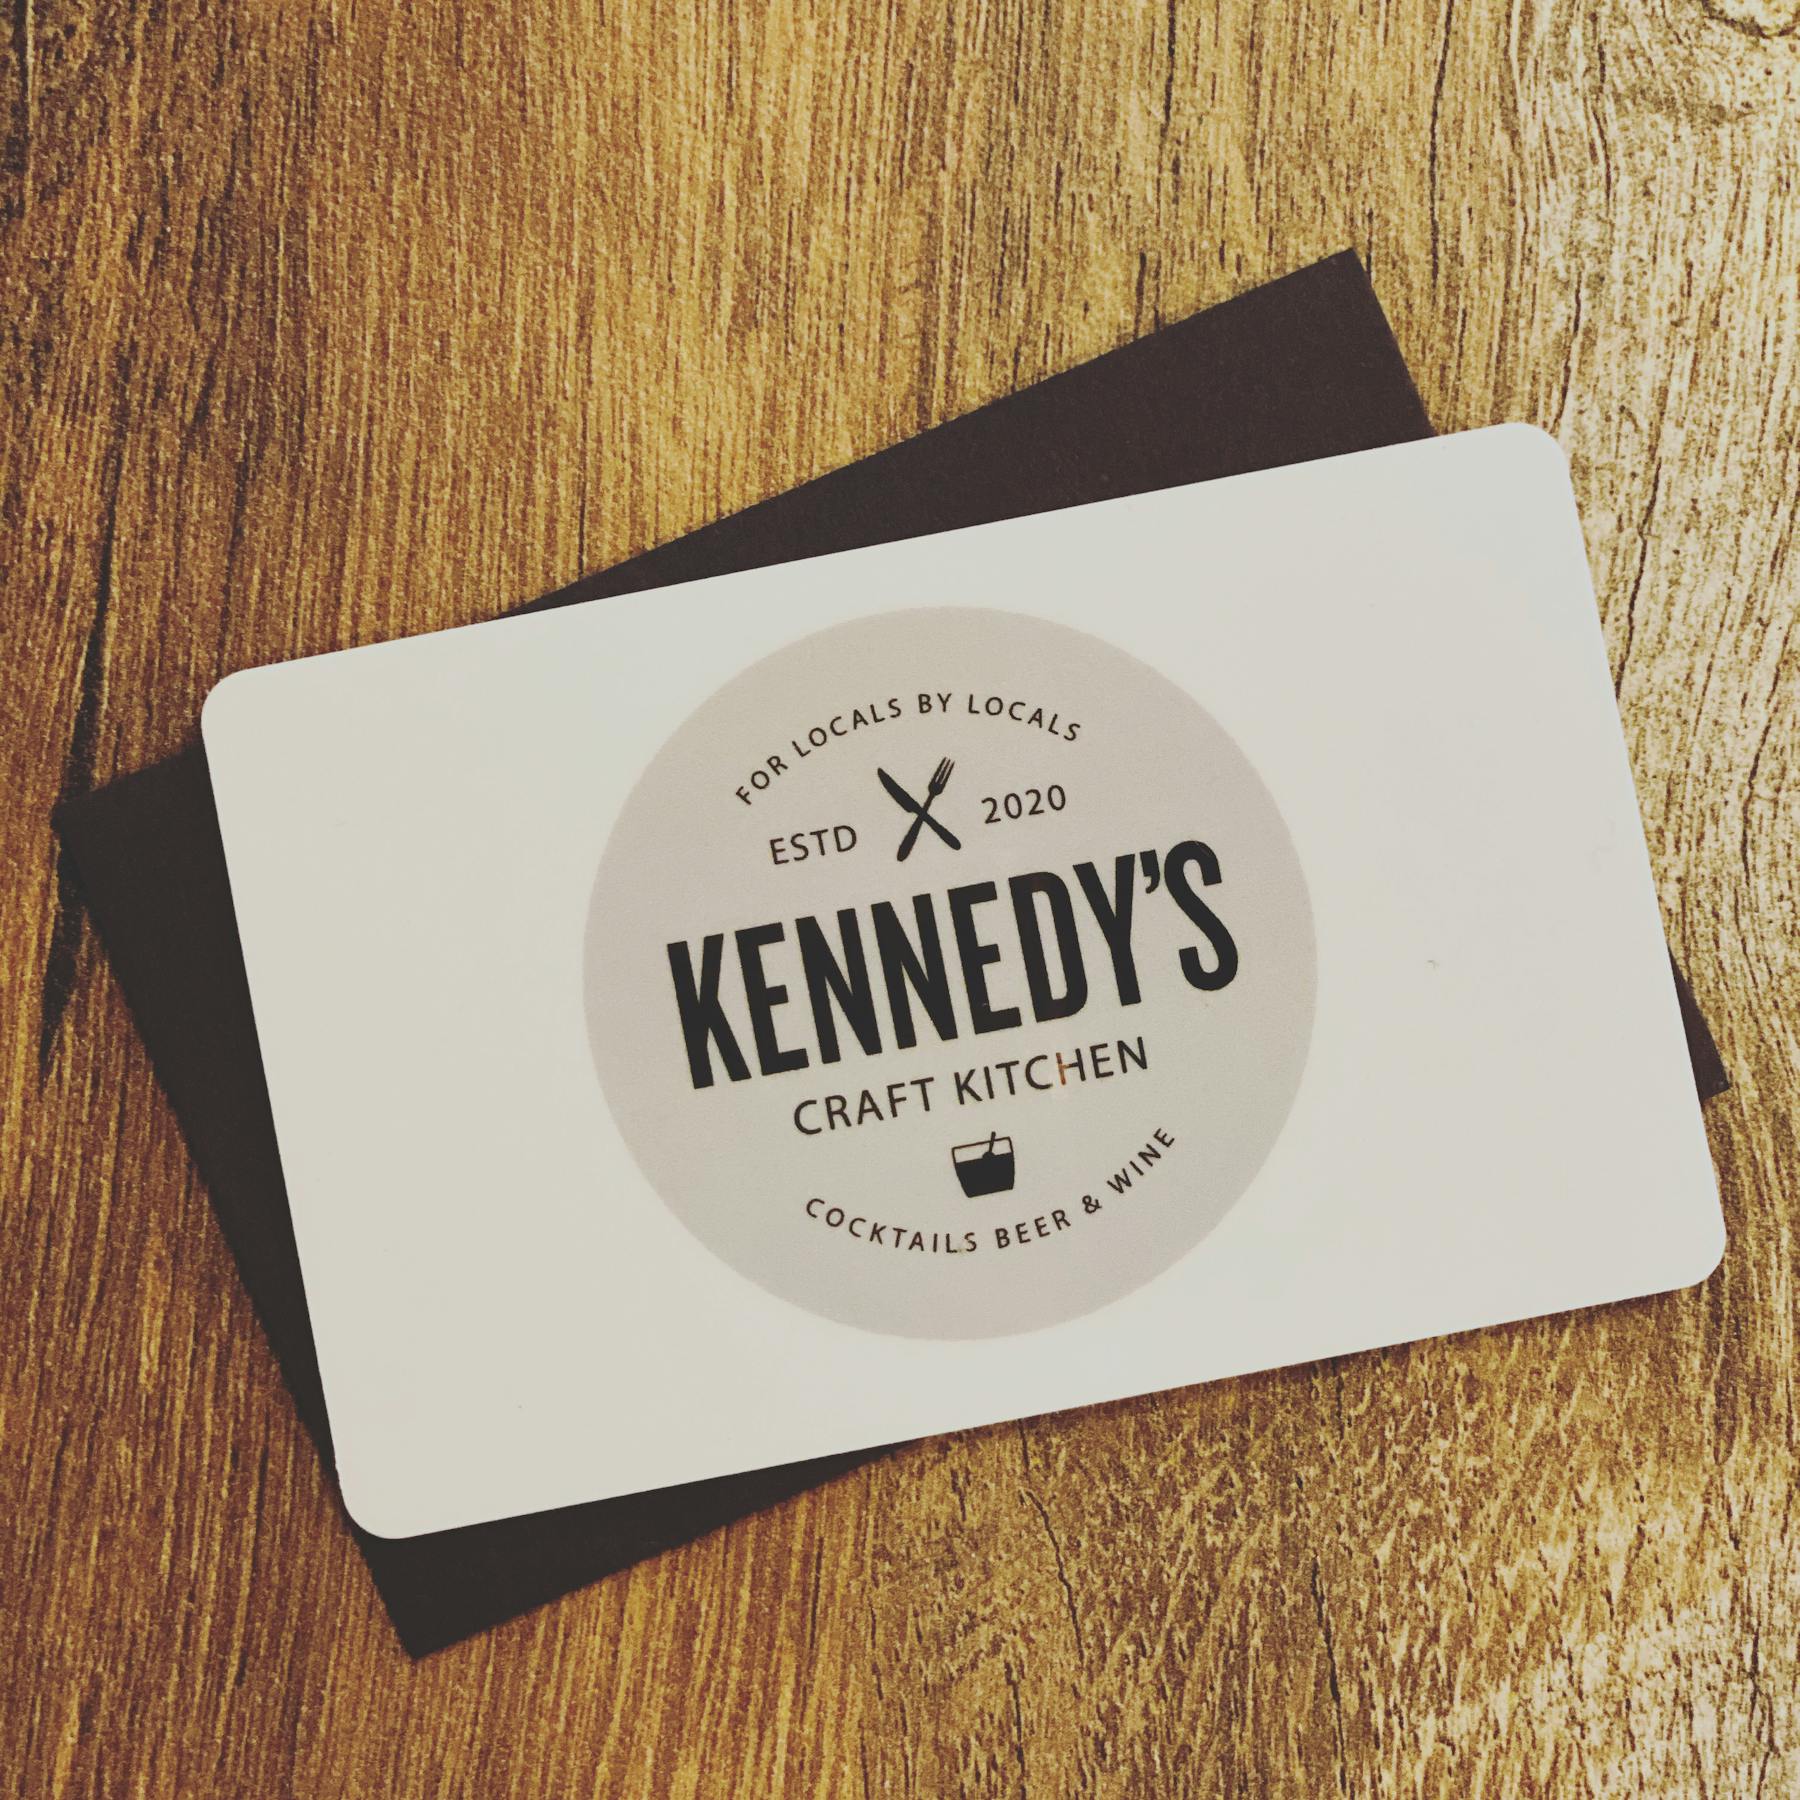 Gift cards available for purchase!